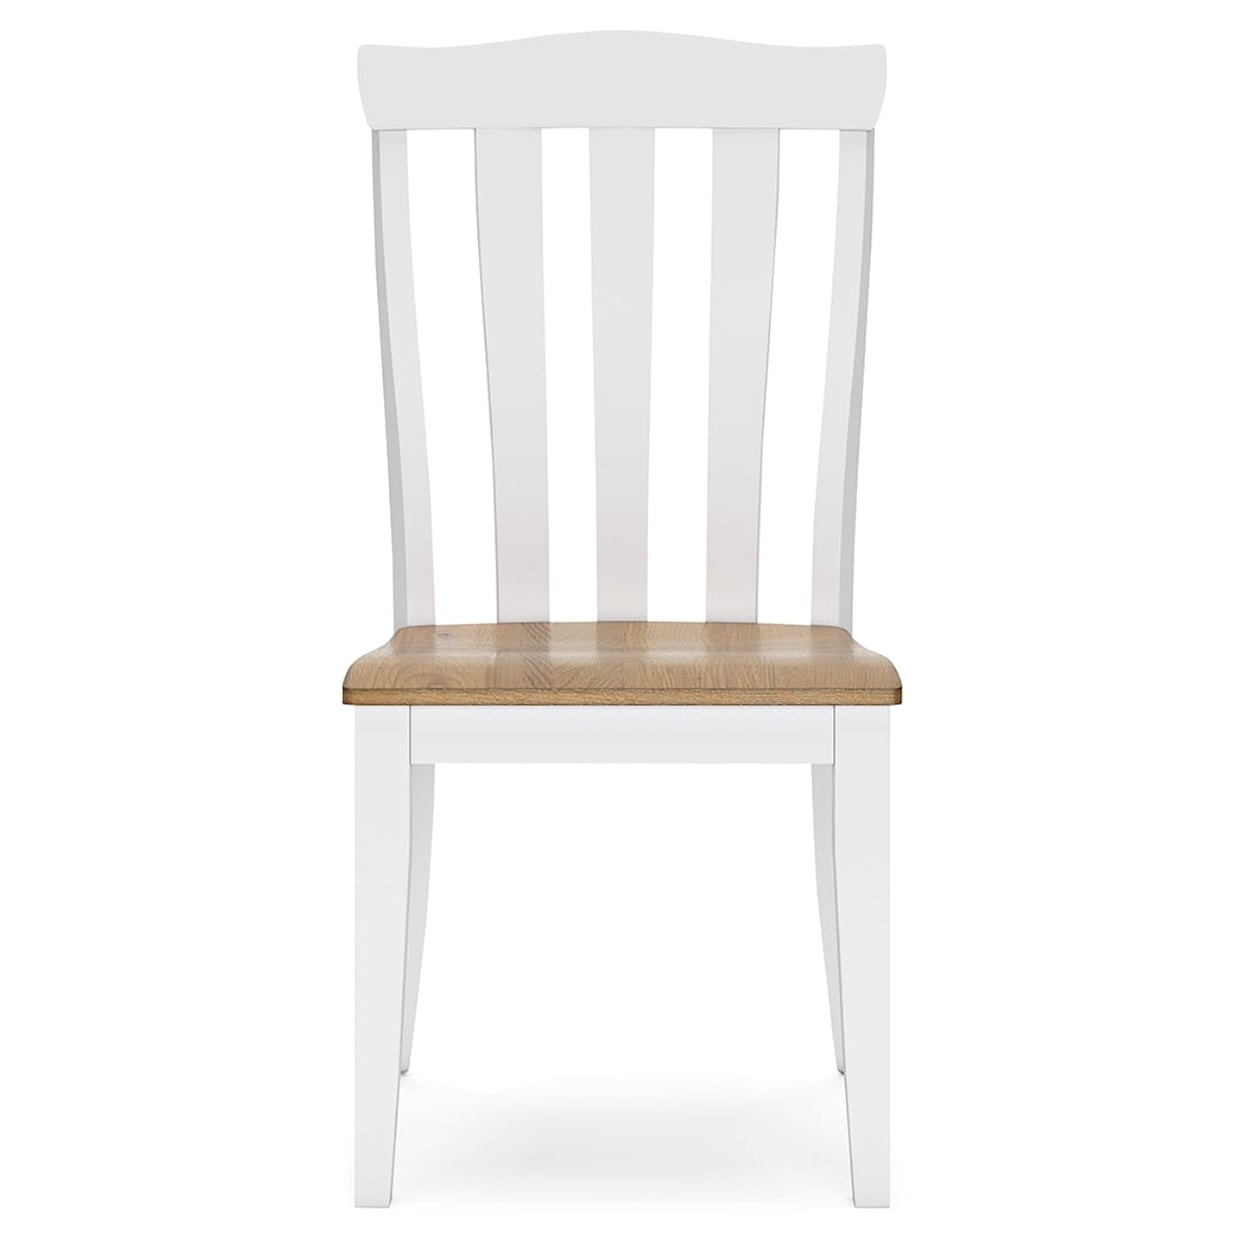 Signature Design by Ashley Furniture Ashbryn Dining Room Side Chair